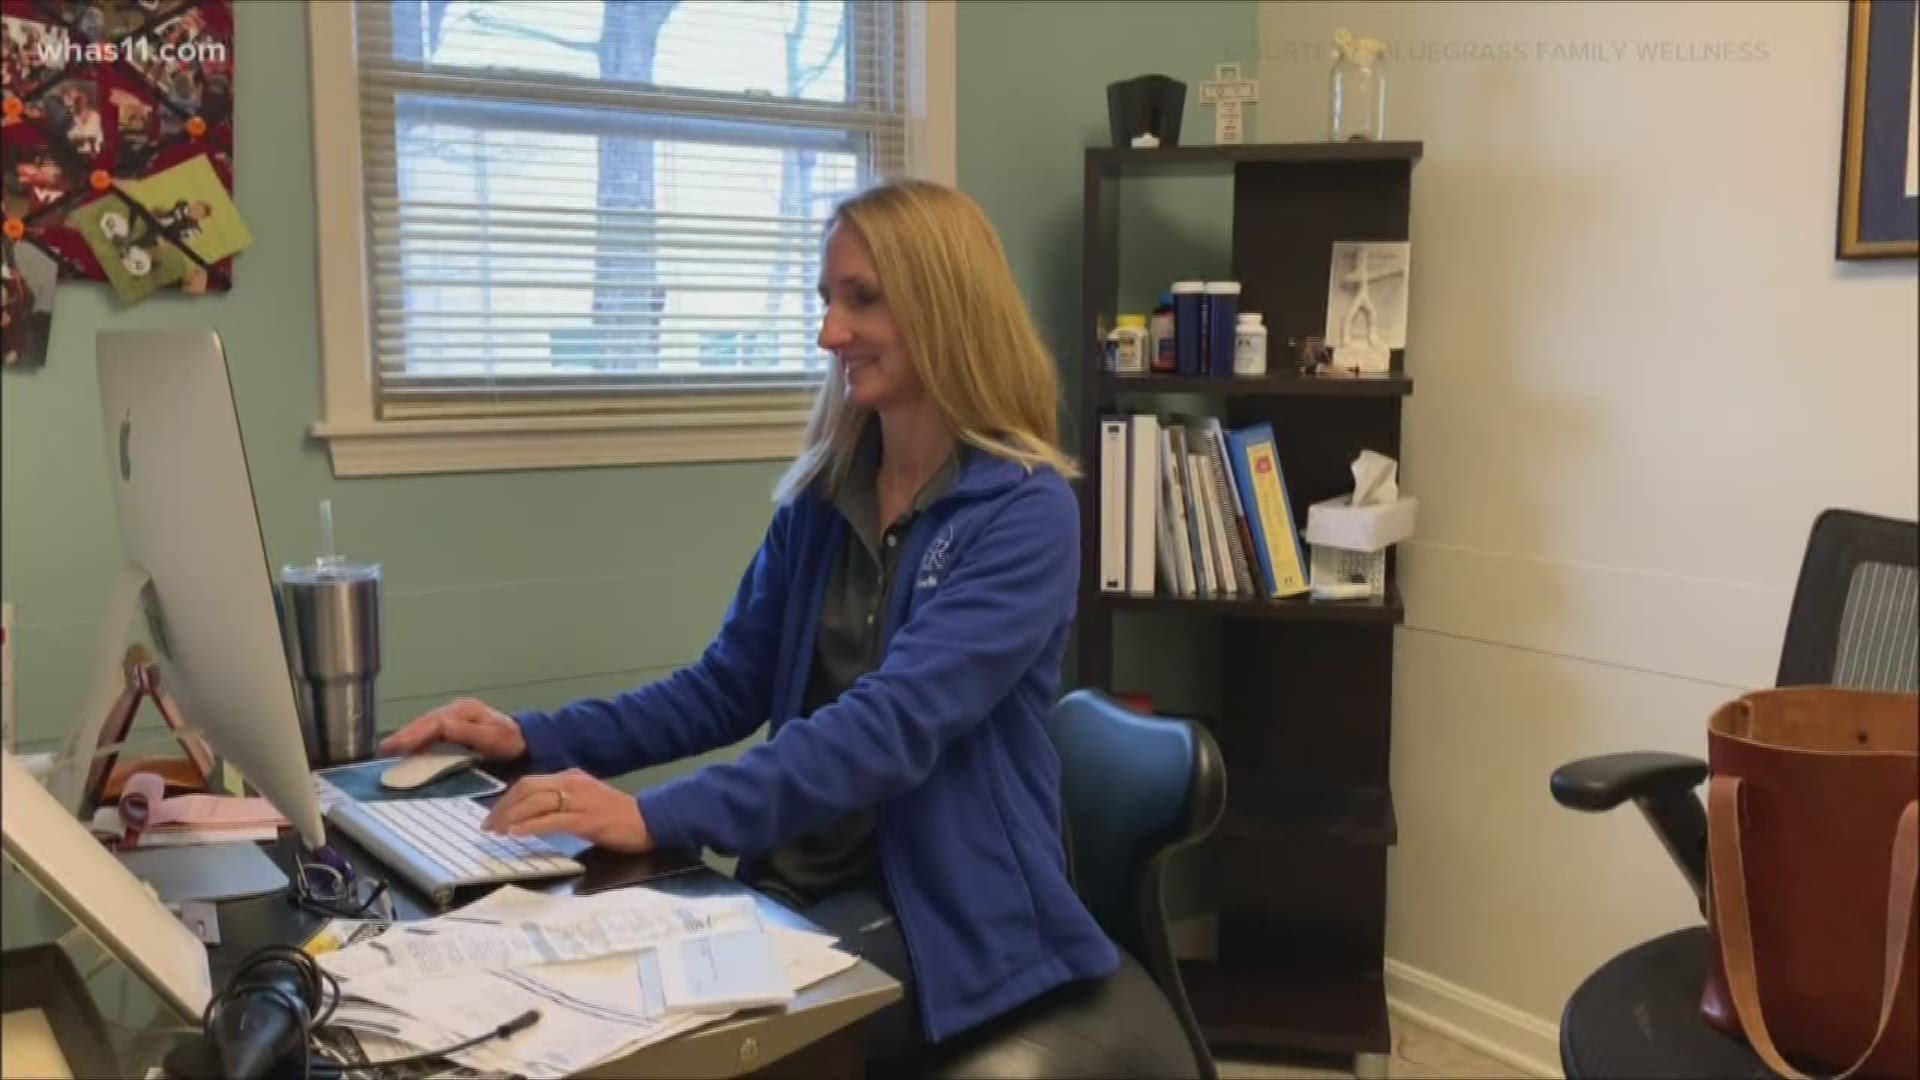 A local doctor's advanced approach is putting her patients ahead of the curve as they deal with coronavirus concerns and every day medical issues.